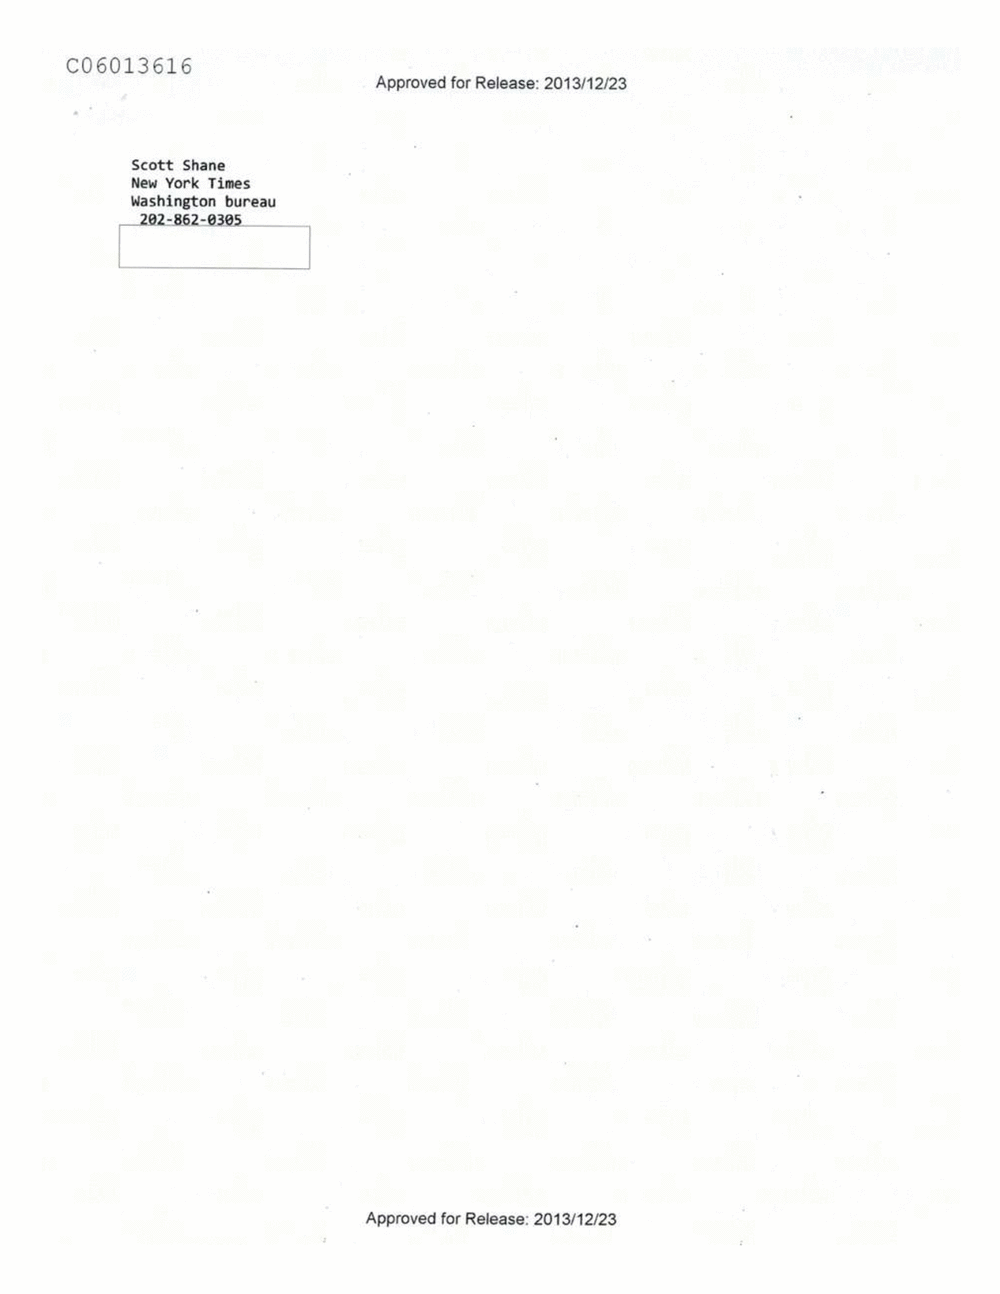 Page 445 from Email Correspondence Between Reporters and CIA Flacks